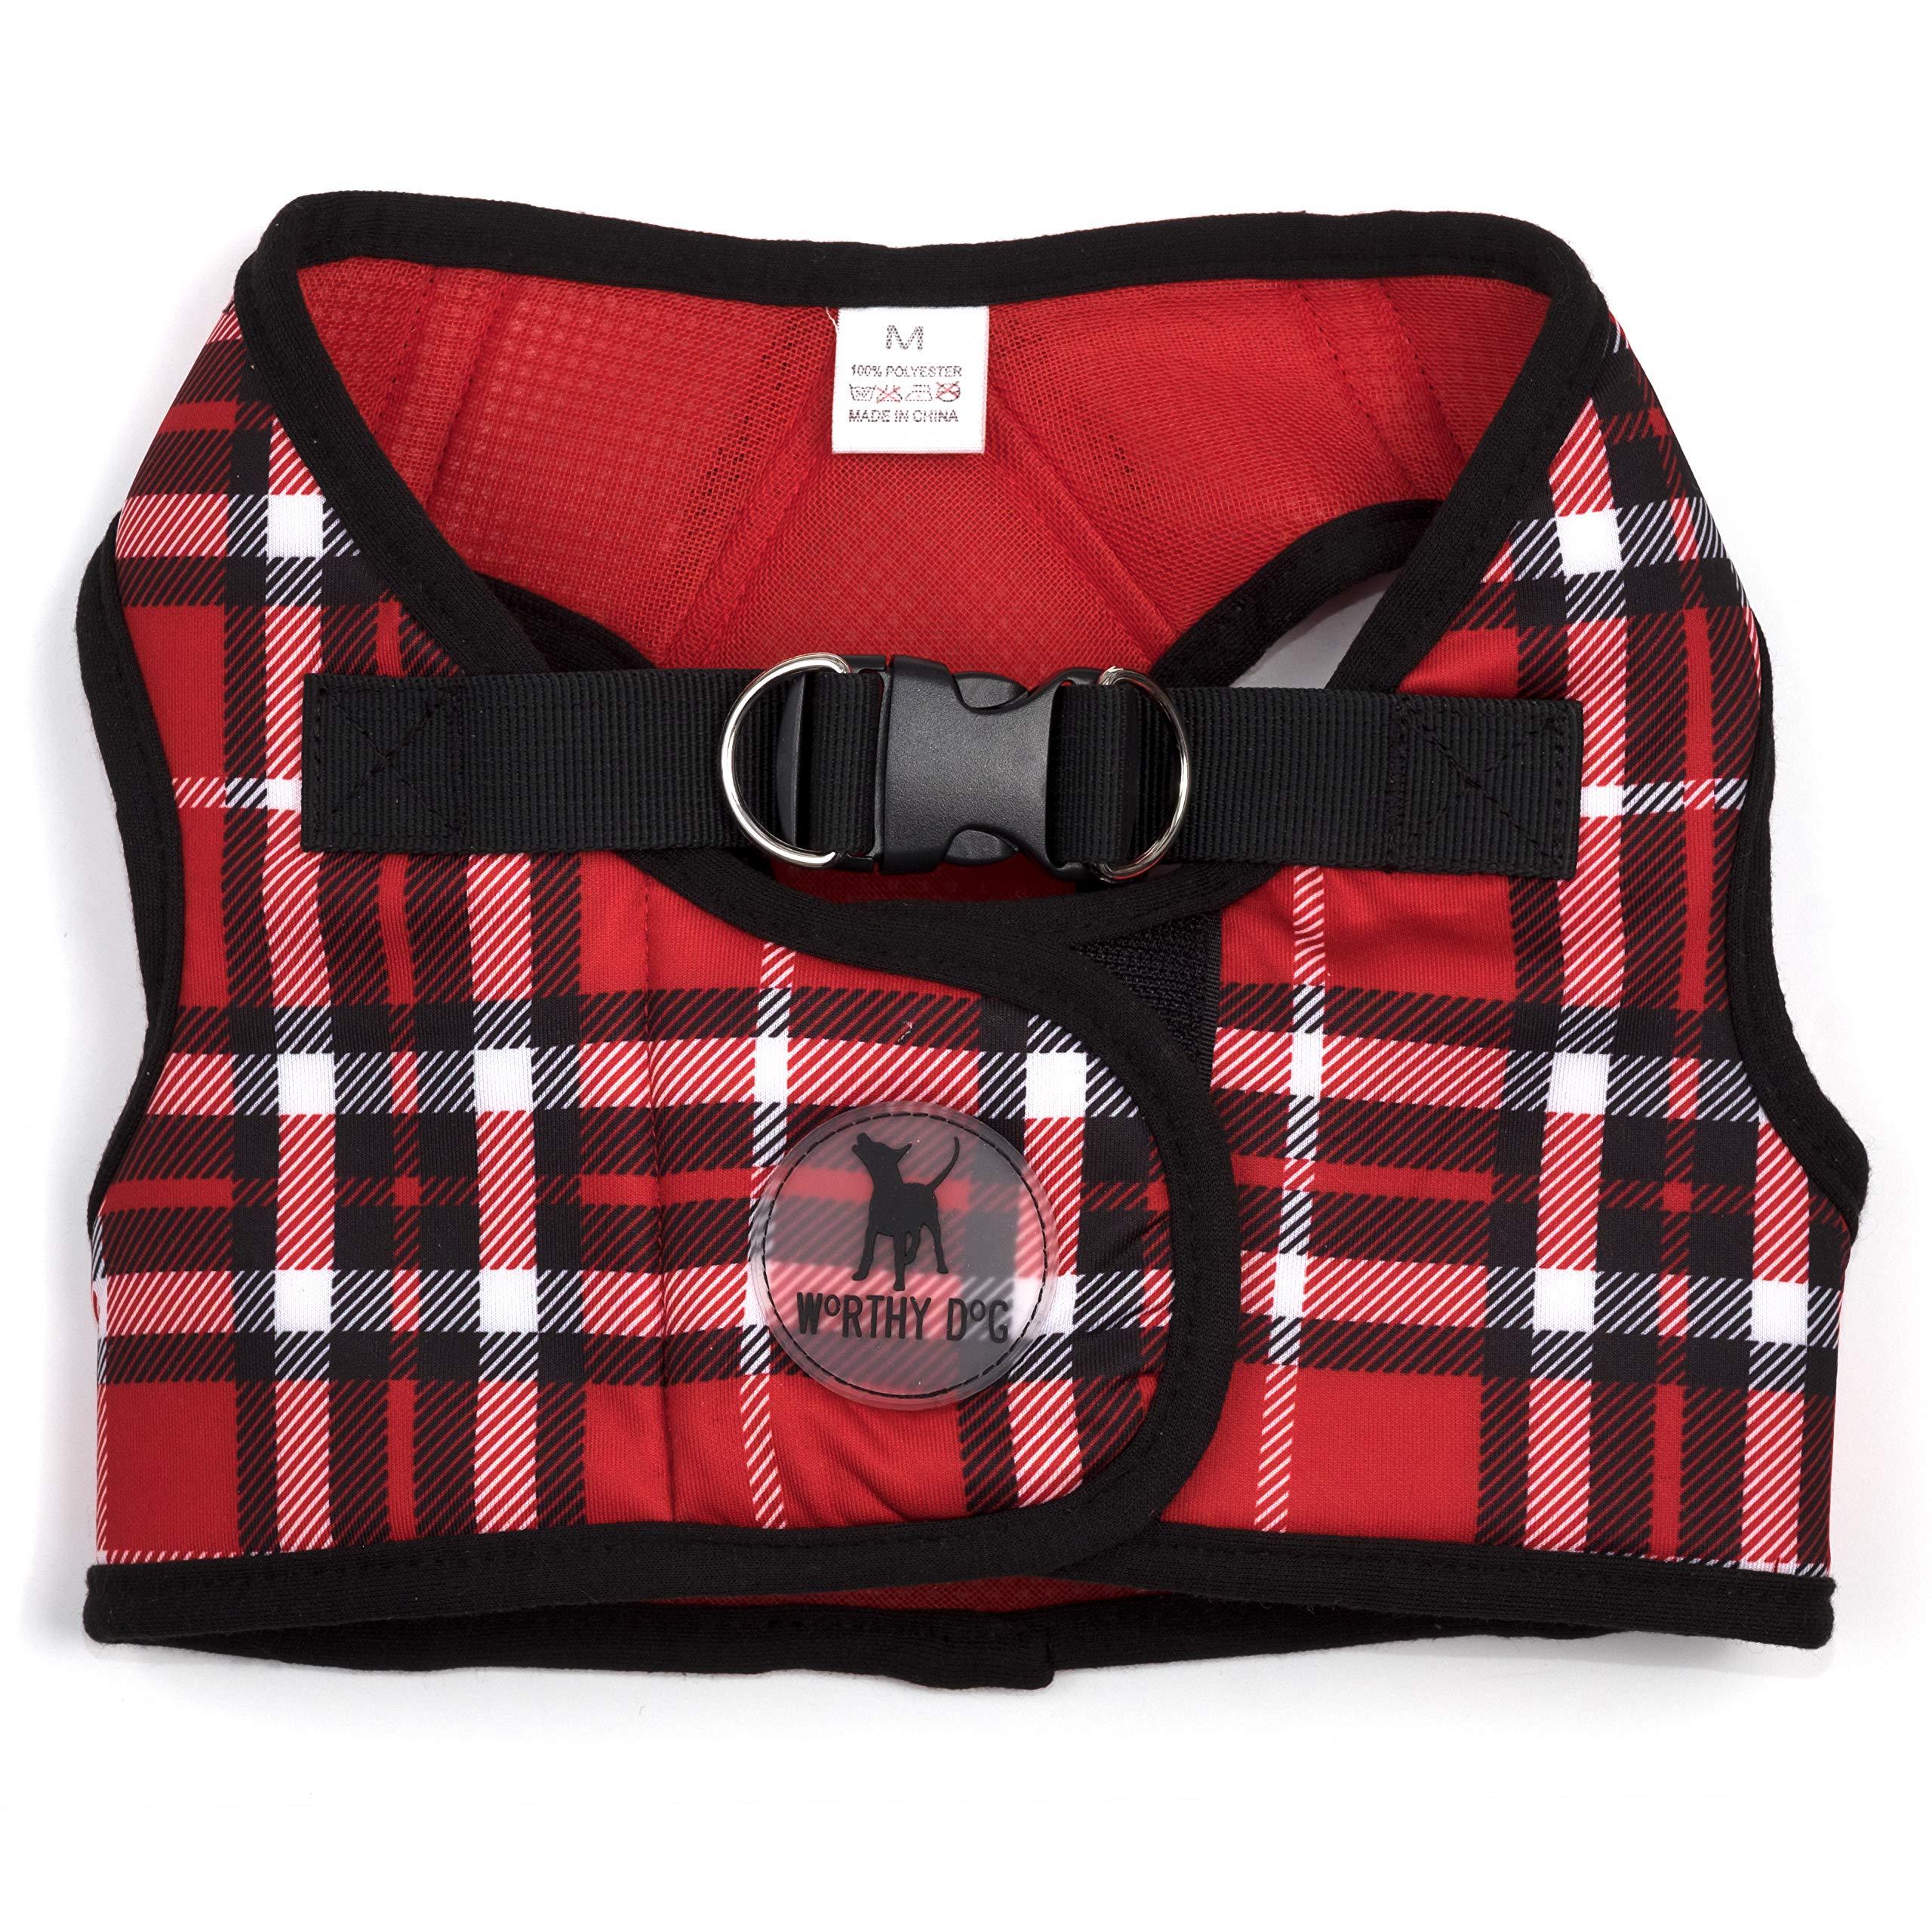 The Worthy Dog Sidekick Padded Harness Red Plaid Pattern With Secure Back Buckle, Adjustable Velcro, and D rings for Leash - Cute, Fashionable, and Comfy Outdoor Walking Vest Accessory - Medium